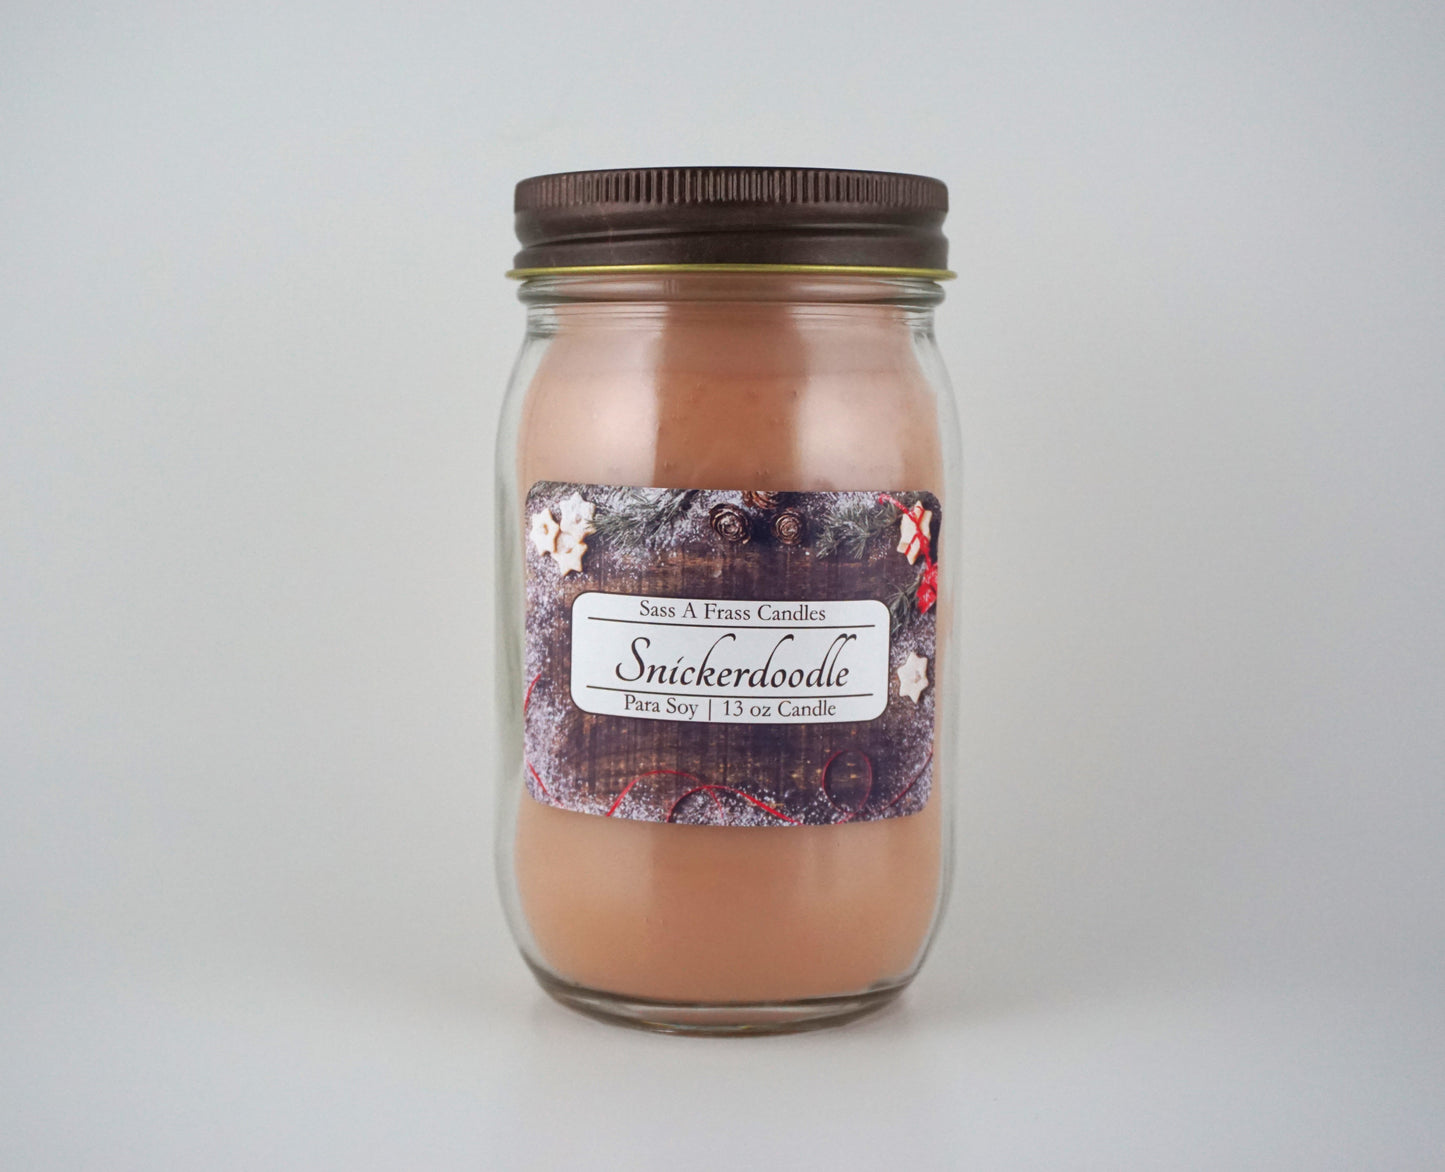 Snickerdoodle 13 oz Candle